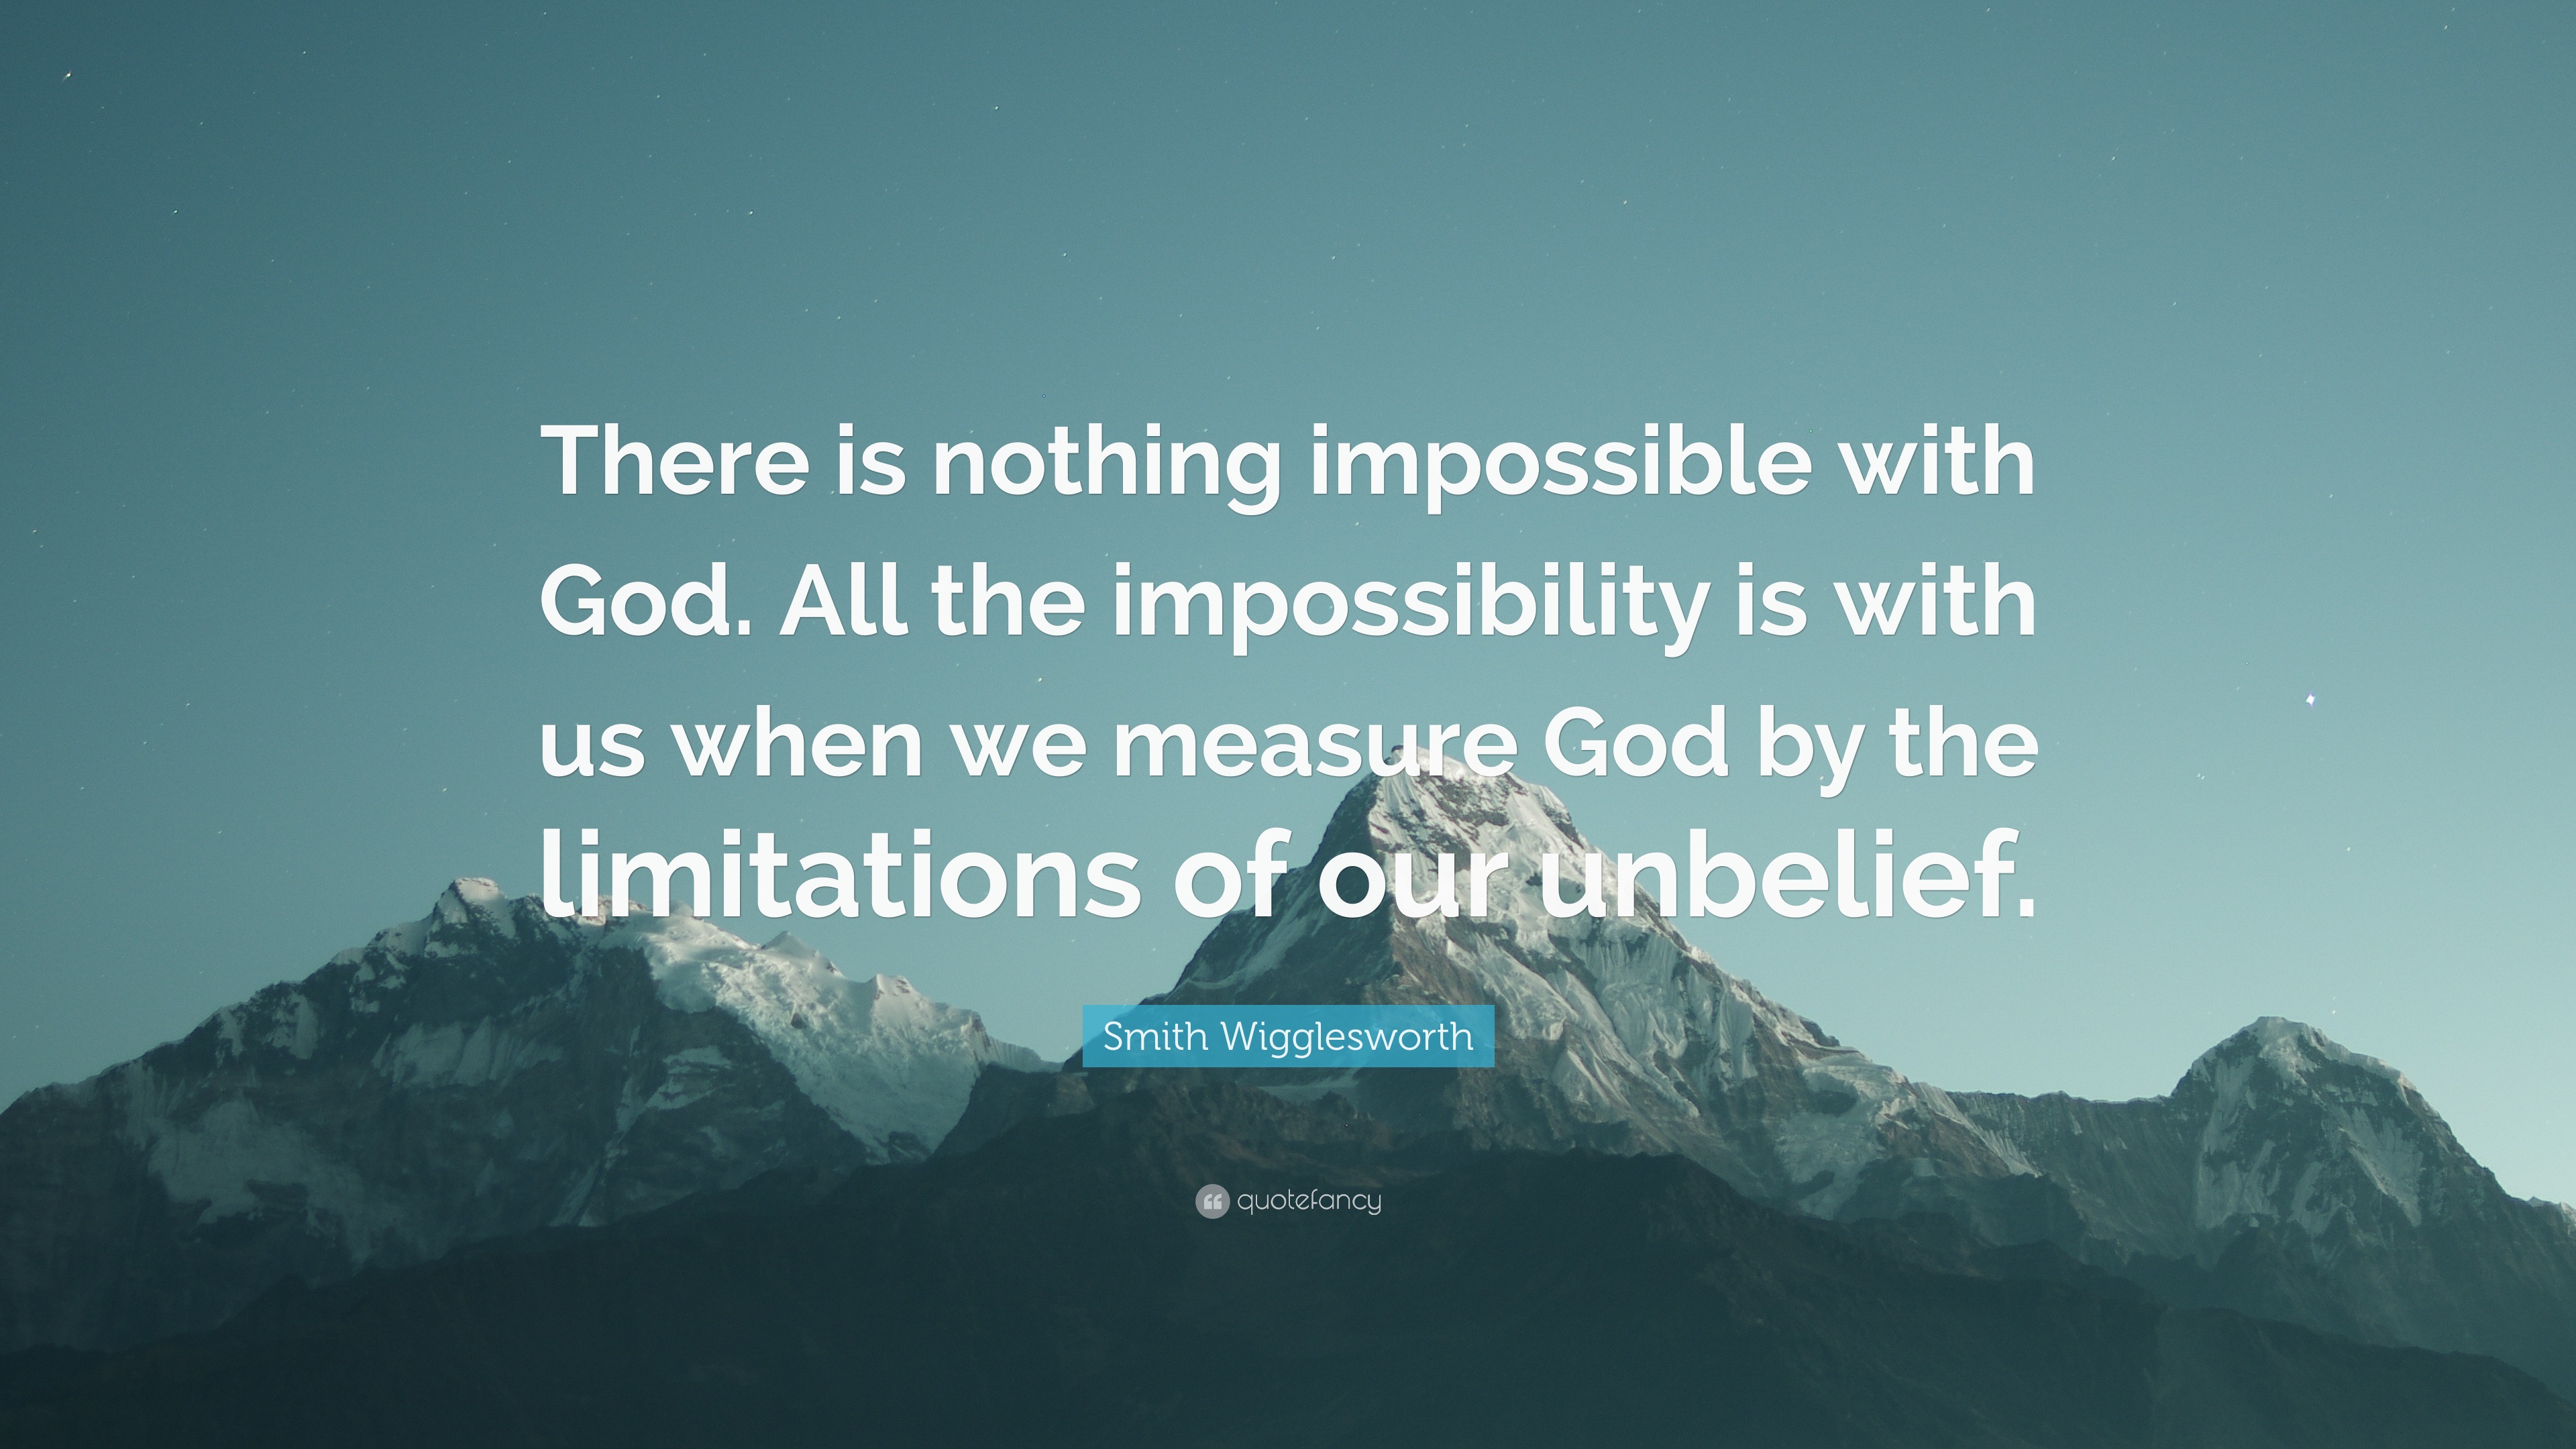 Smith Wigglesworth Quote There Is Nothing Impossible With God All The Impossibility Is With Us When We Measure God By The Limitations Of Our Unb